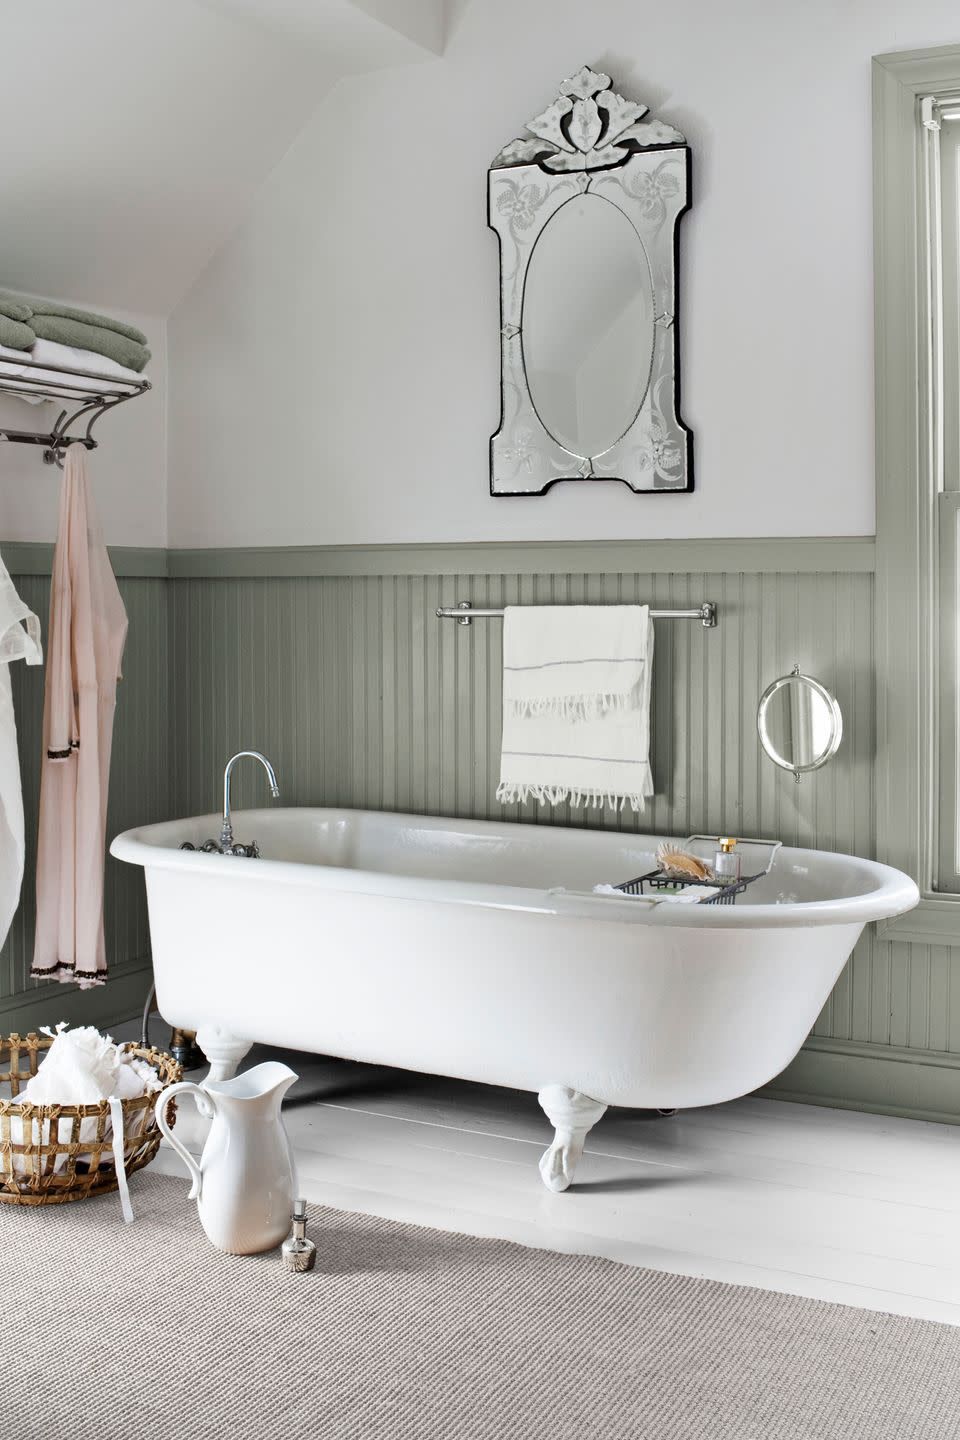 bathroom with white clawfoot tub and gray green wainscotting